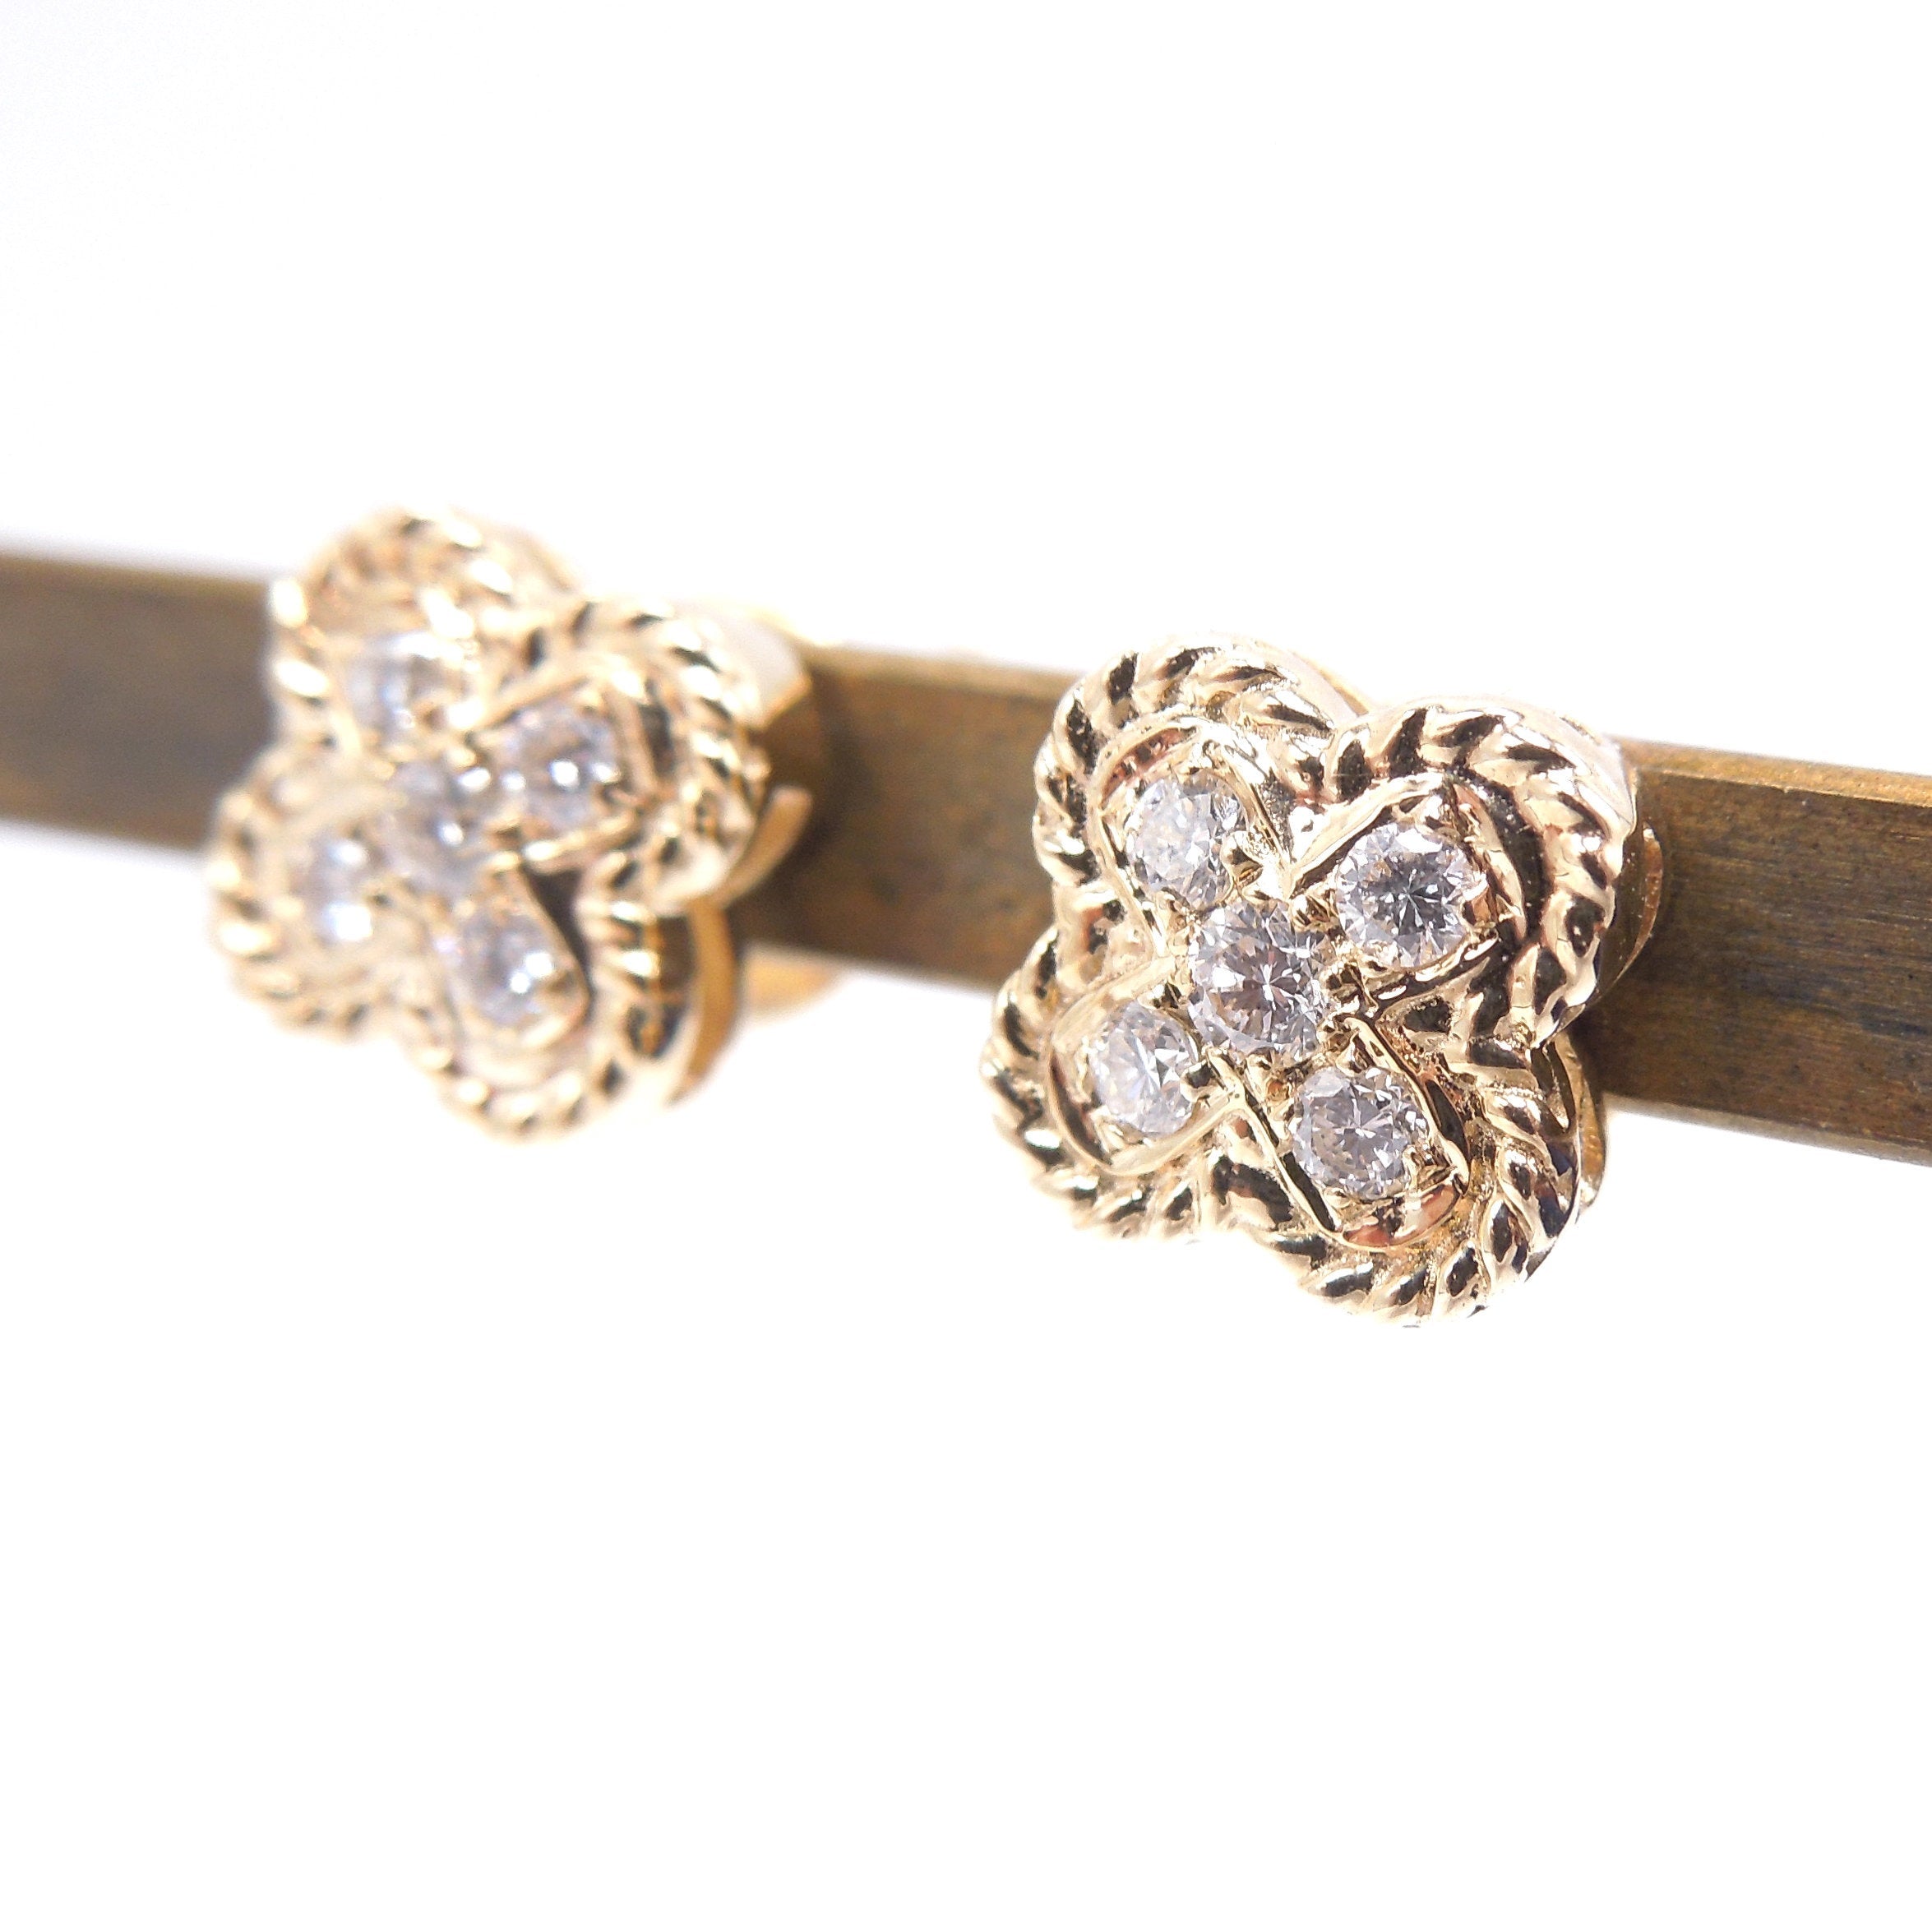 14K Yellow Gold and Diamond Floral Shaped Stud Earrings